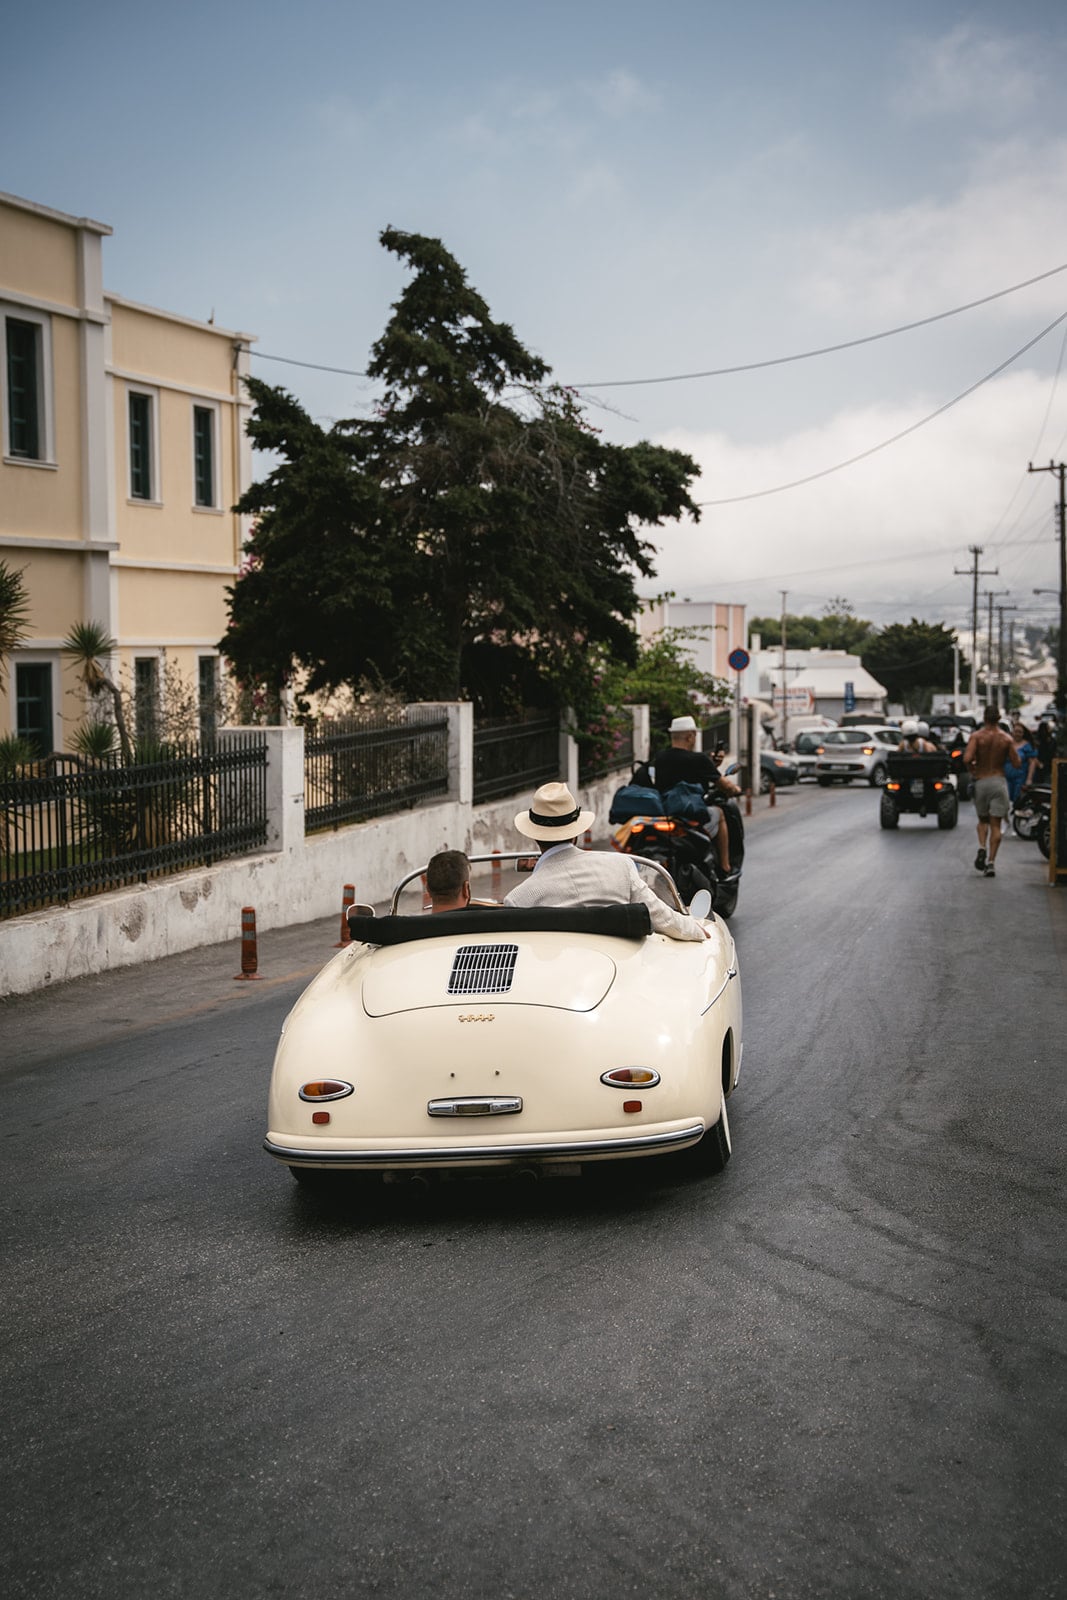 Against the sky, the couple and their vintage ride share a moment above the clouds